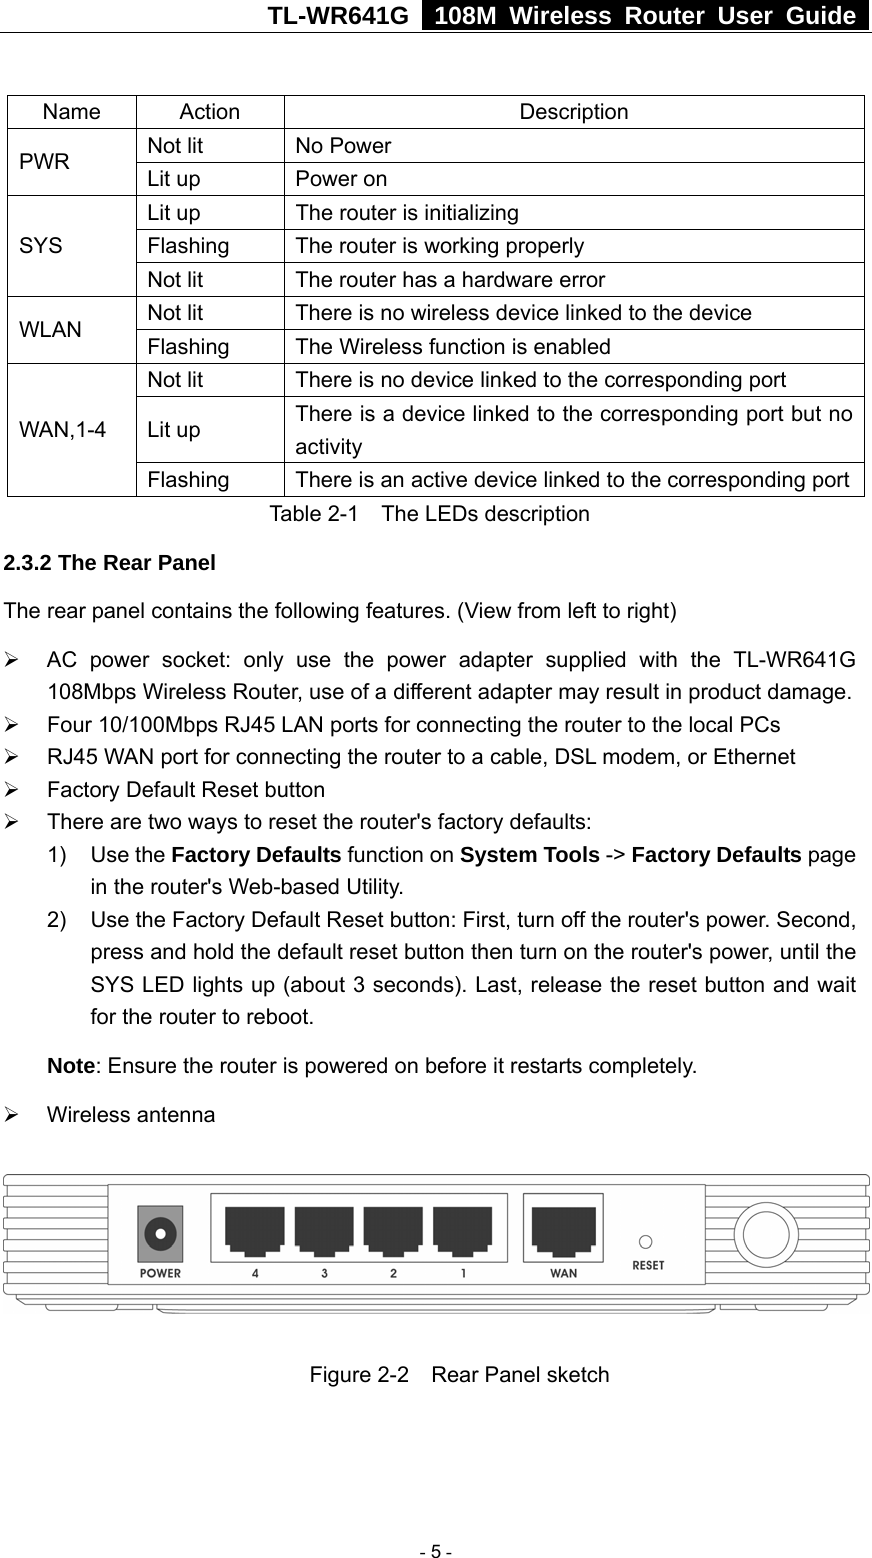 TL-WR641G   108M Wireless Router User Guide   Name Action  Description Not lit  No Power PWR  Lit up  Power on Lit up  The router is initializing Flashing  The router is working properly SYS Not lit  The router has a hardware error Not lit  There is no wireless device linked to the device WLAN  Flashing  The Wireless function is enabled Not lit  There is no device linked to the corresponding port Lit up  There is a device linked to the corresponding port but no activity WAN,1-4 Flashing  There is an active device linked to the corresponding portTable 2-1    The LEDs description 2.3.2 The Rear Panel The rear panel contains the following features. (View from left to right) ¾  AC power socket: only use the power adapter supplied with the TL-WR641G 108Mbps Wireless Router, use of a different adapter may result in product damage. ¾  Four 10/100Mbps RJ45 LAN ports for connecting the router to the local PCs ¾  RJ45 WAN port for connecting the router to a cable, DSL modem, or Ethernet   ¾  Factory Default Reset button ¾  There are two ways to reset the router&apos;s factory defaults: 1) Use the Factory Defaults function on System Tools -&gt; Factory Defaults page in the router&apos;s Web-based Utility. 2)  Use the Factory Default Reset button: First, turn off the router&apos;s power. Second, press and hold the default reset button then turn on the router&apos;s power, until the SYS LED lights up (about 3 seconds). Last, release the reset button and wait for the router to reboot. Note: Ensure the router is powered on before it restarts completely. ¾ Wireless antenna    Figure 2-2    Rear Panel sketch  - 5 - 